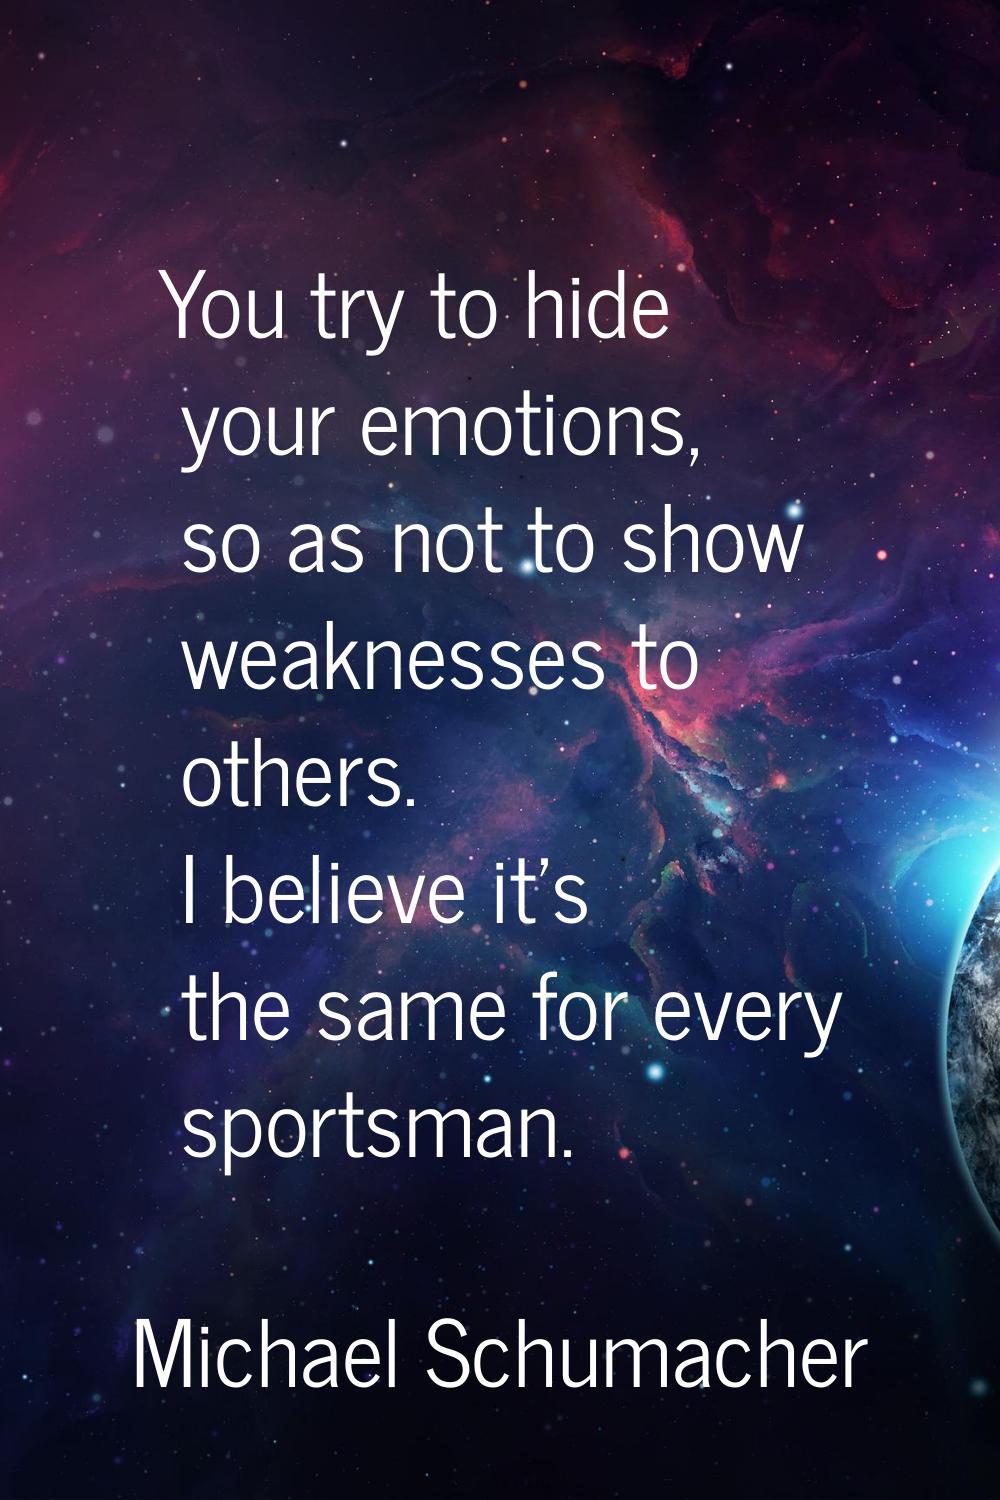 You try to hide your emotions, so as not to show weaknesses to others. I believe it's the same for 